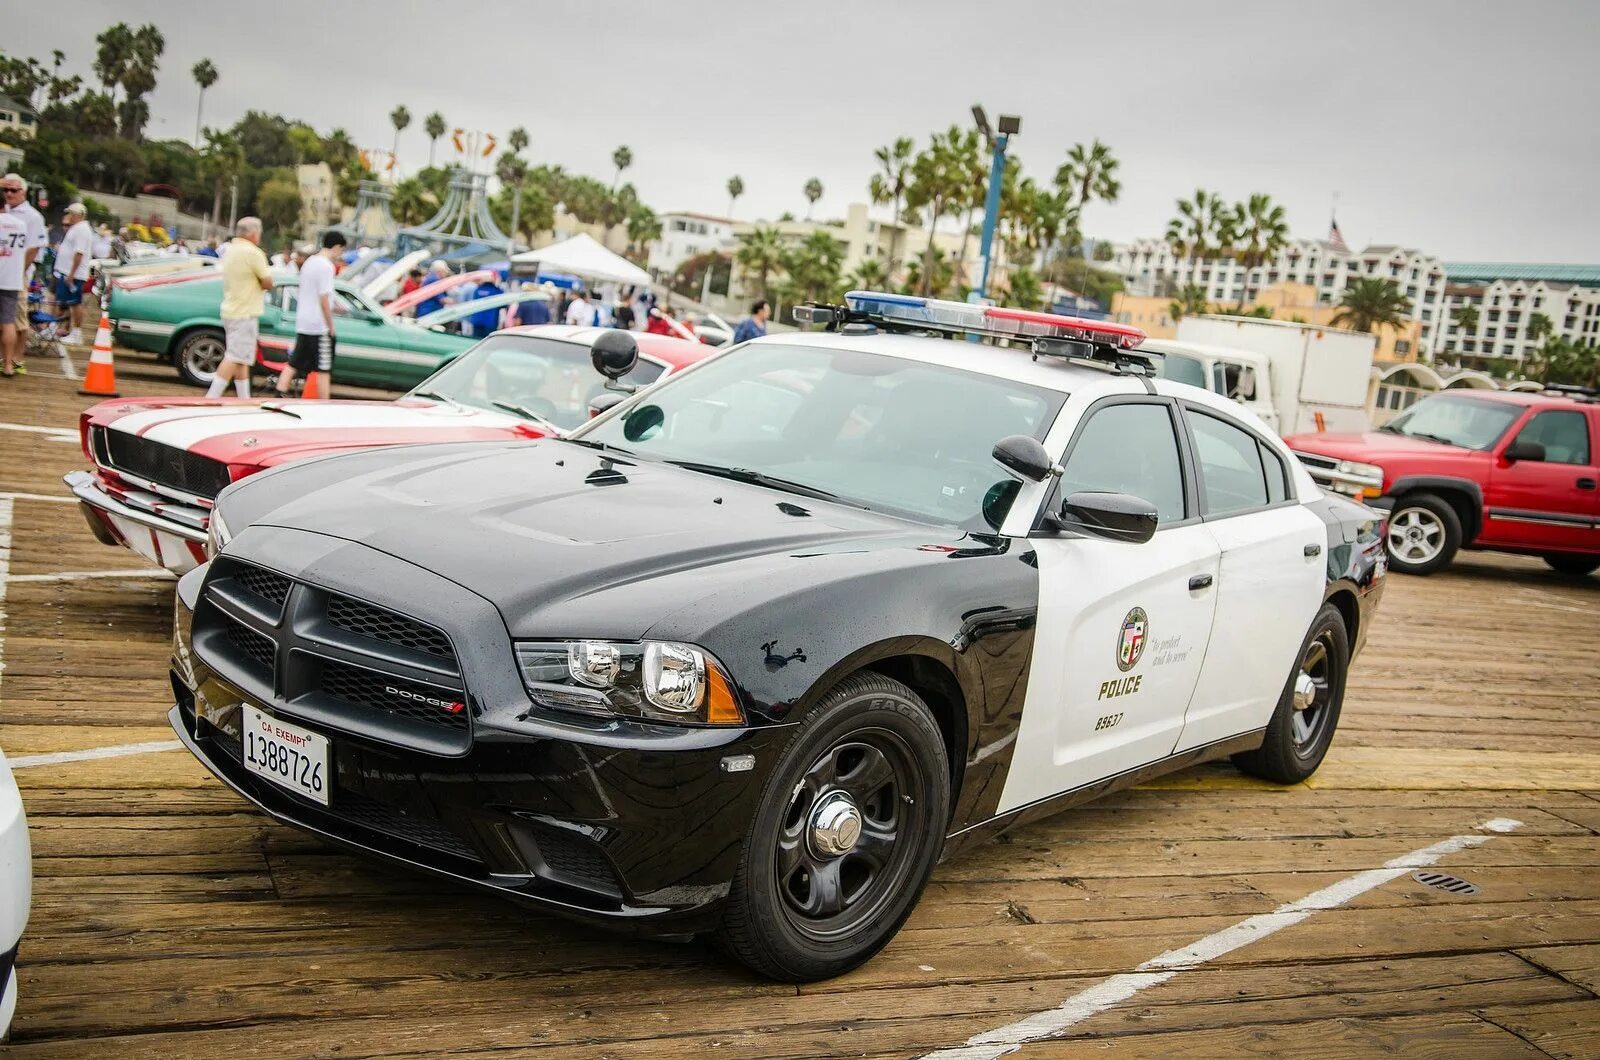 Полицейский мустанг. Dodge Charger 2014 LAPD. Dodge Charger LAPD. Додж Чарджер 2010 LAPD. Dodge Charger Police LAPD.